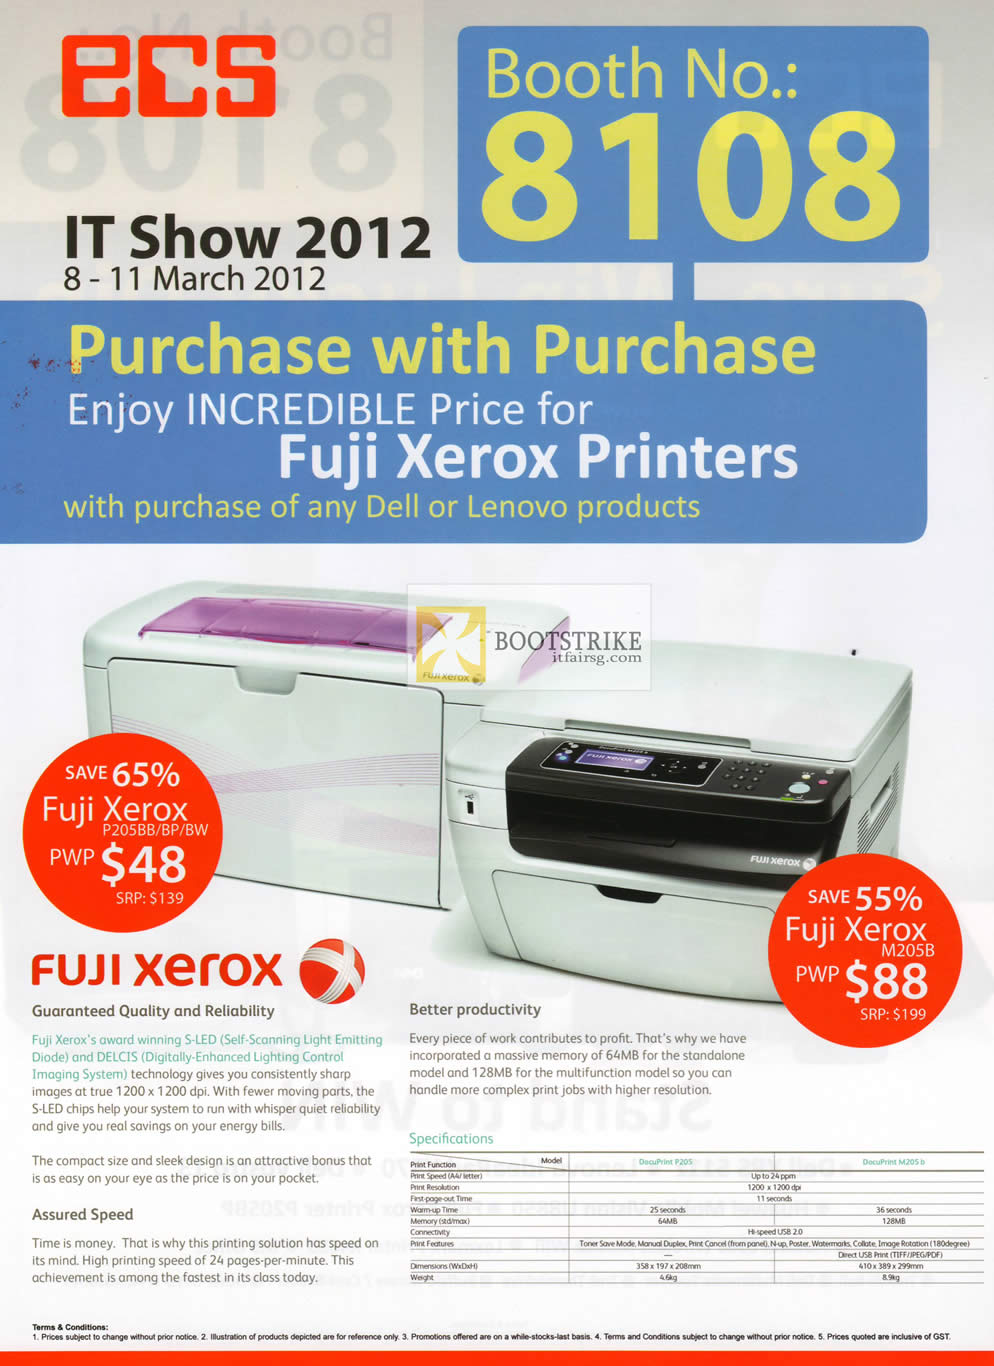 IT SHOW 2012 price list image brochure of Dell Lenovo Fuji Xerox Printers Purchase With Purchase